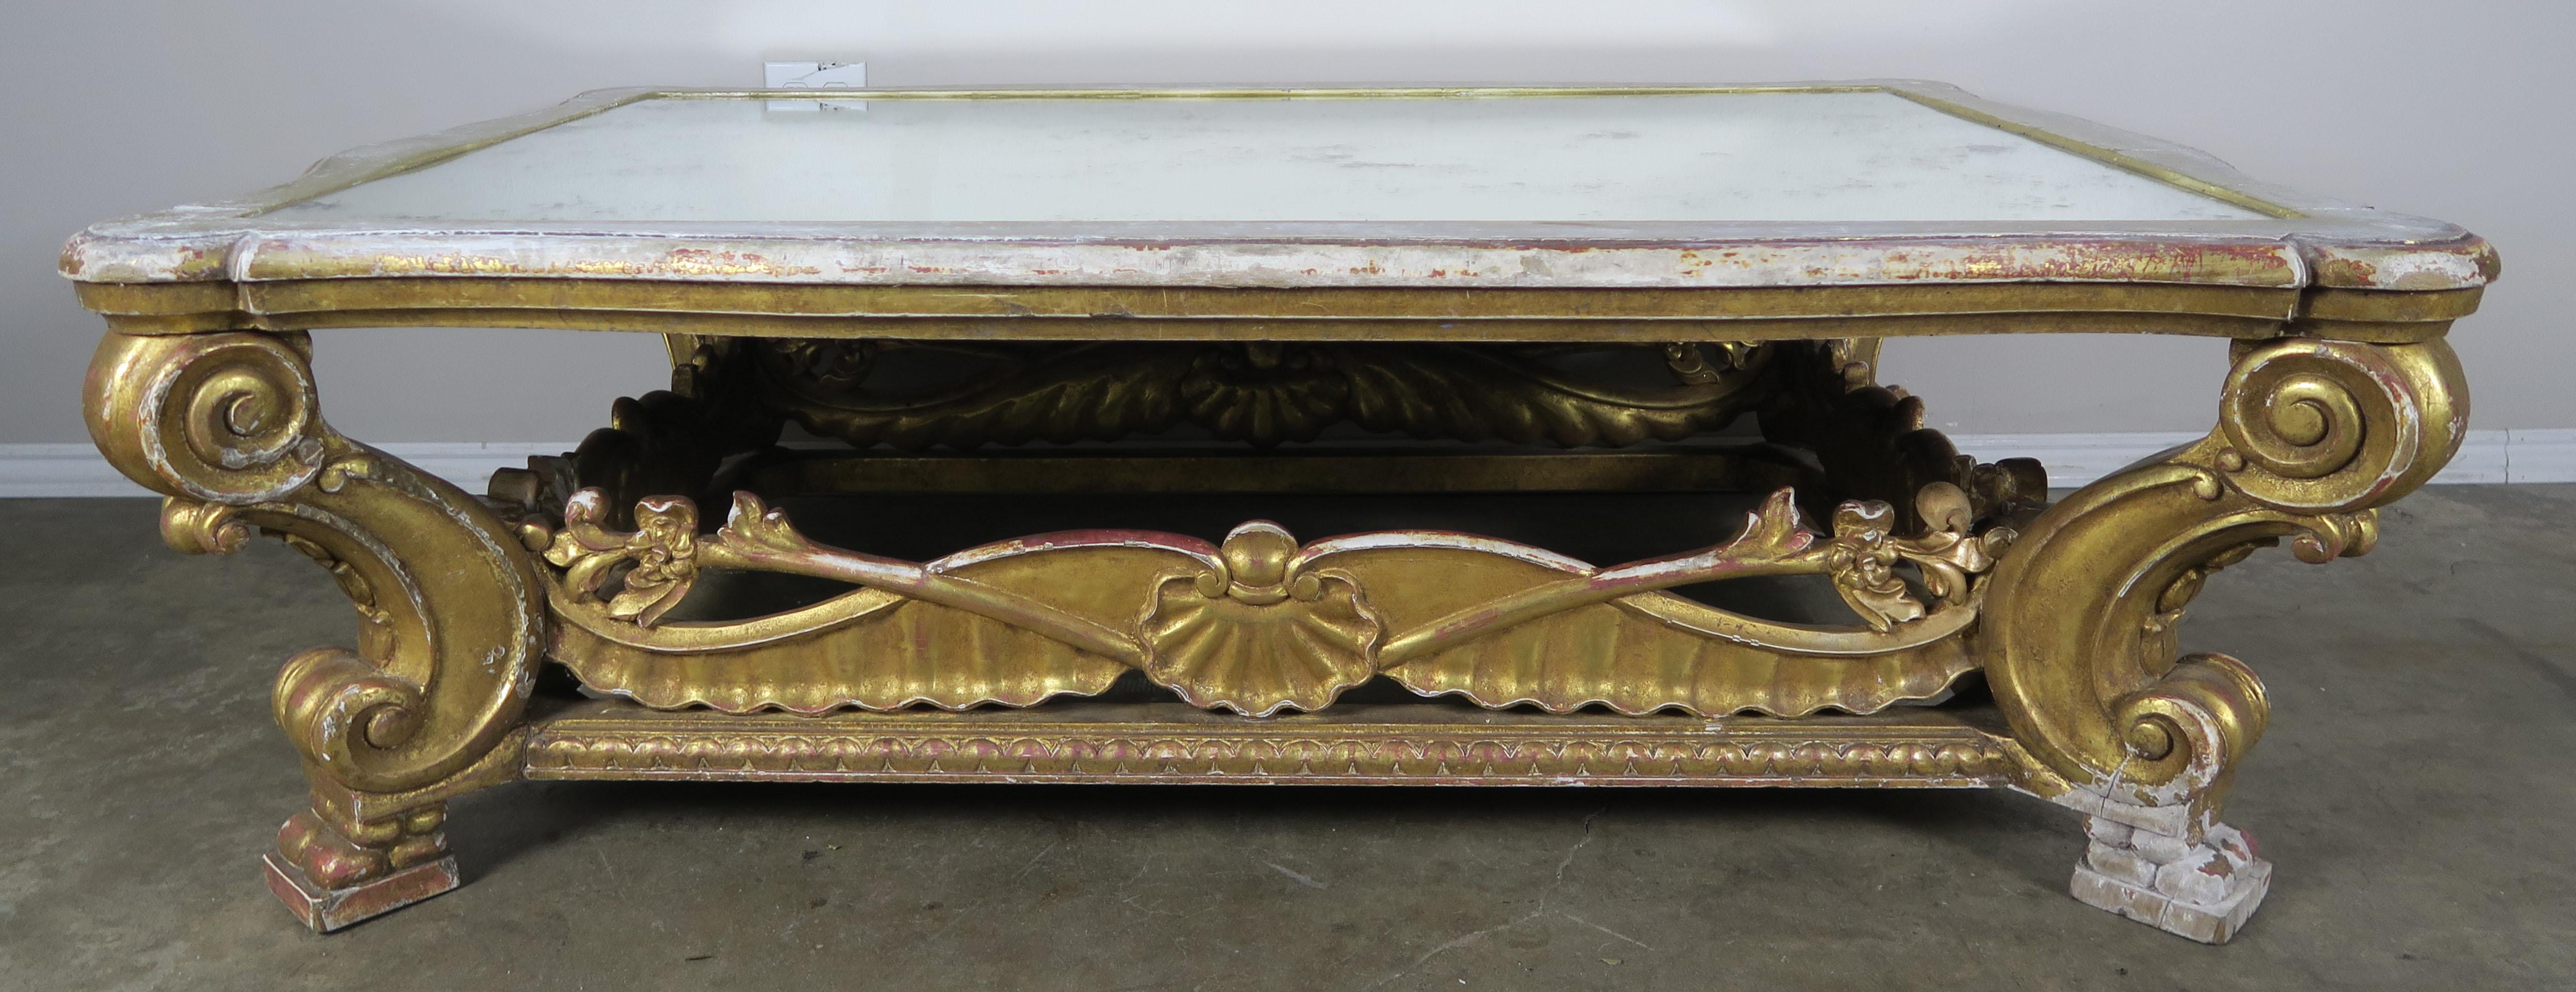 Italian giltwood carved coffee table that stands on four scrolled leg. The legs are connected by carved giltwood panels with a centre shell motif. Antiqued mirror is inset into the top of the table.